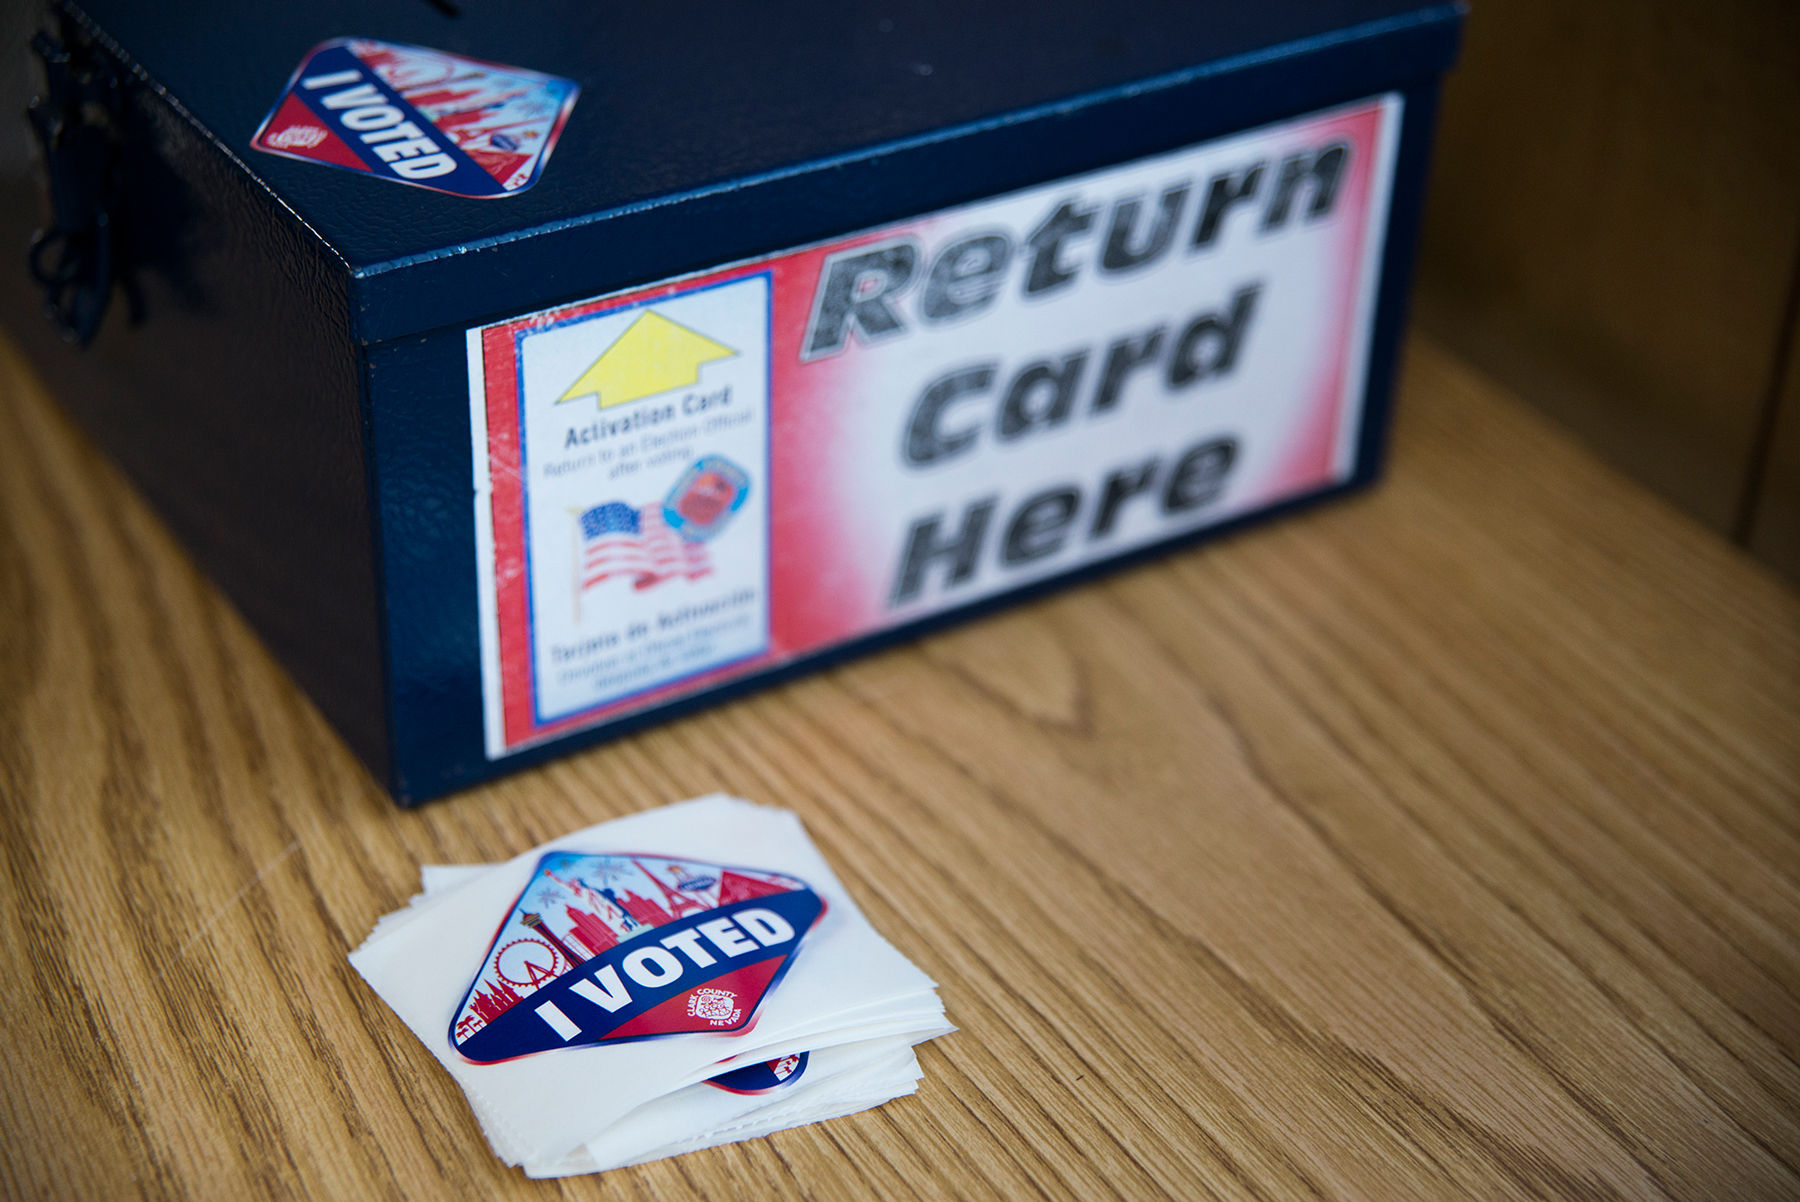 After casting their ballots, voters in Clark County deposit the cards they use to vote in this box and receive an “I voted” sticker that resembles the Las Vegas welcome sign. (Roman Knertser/News21)
